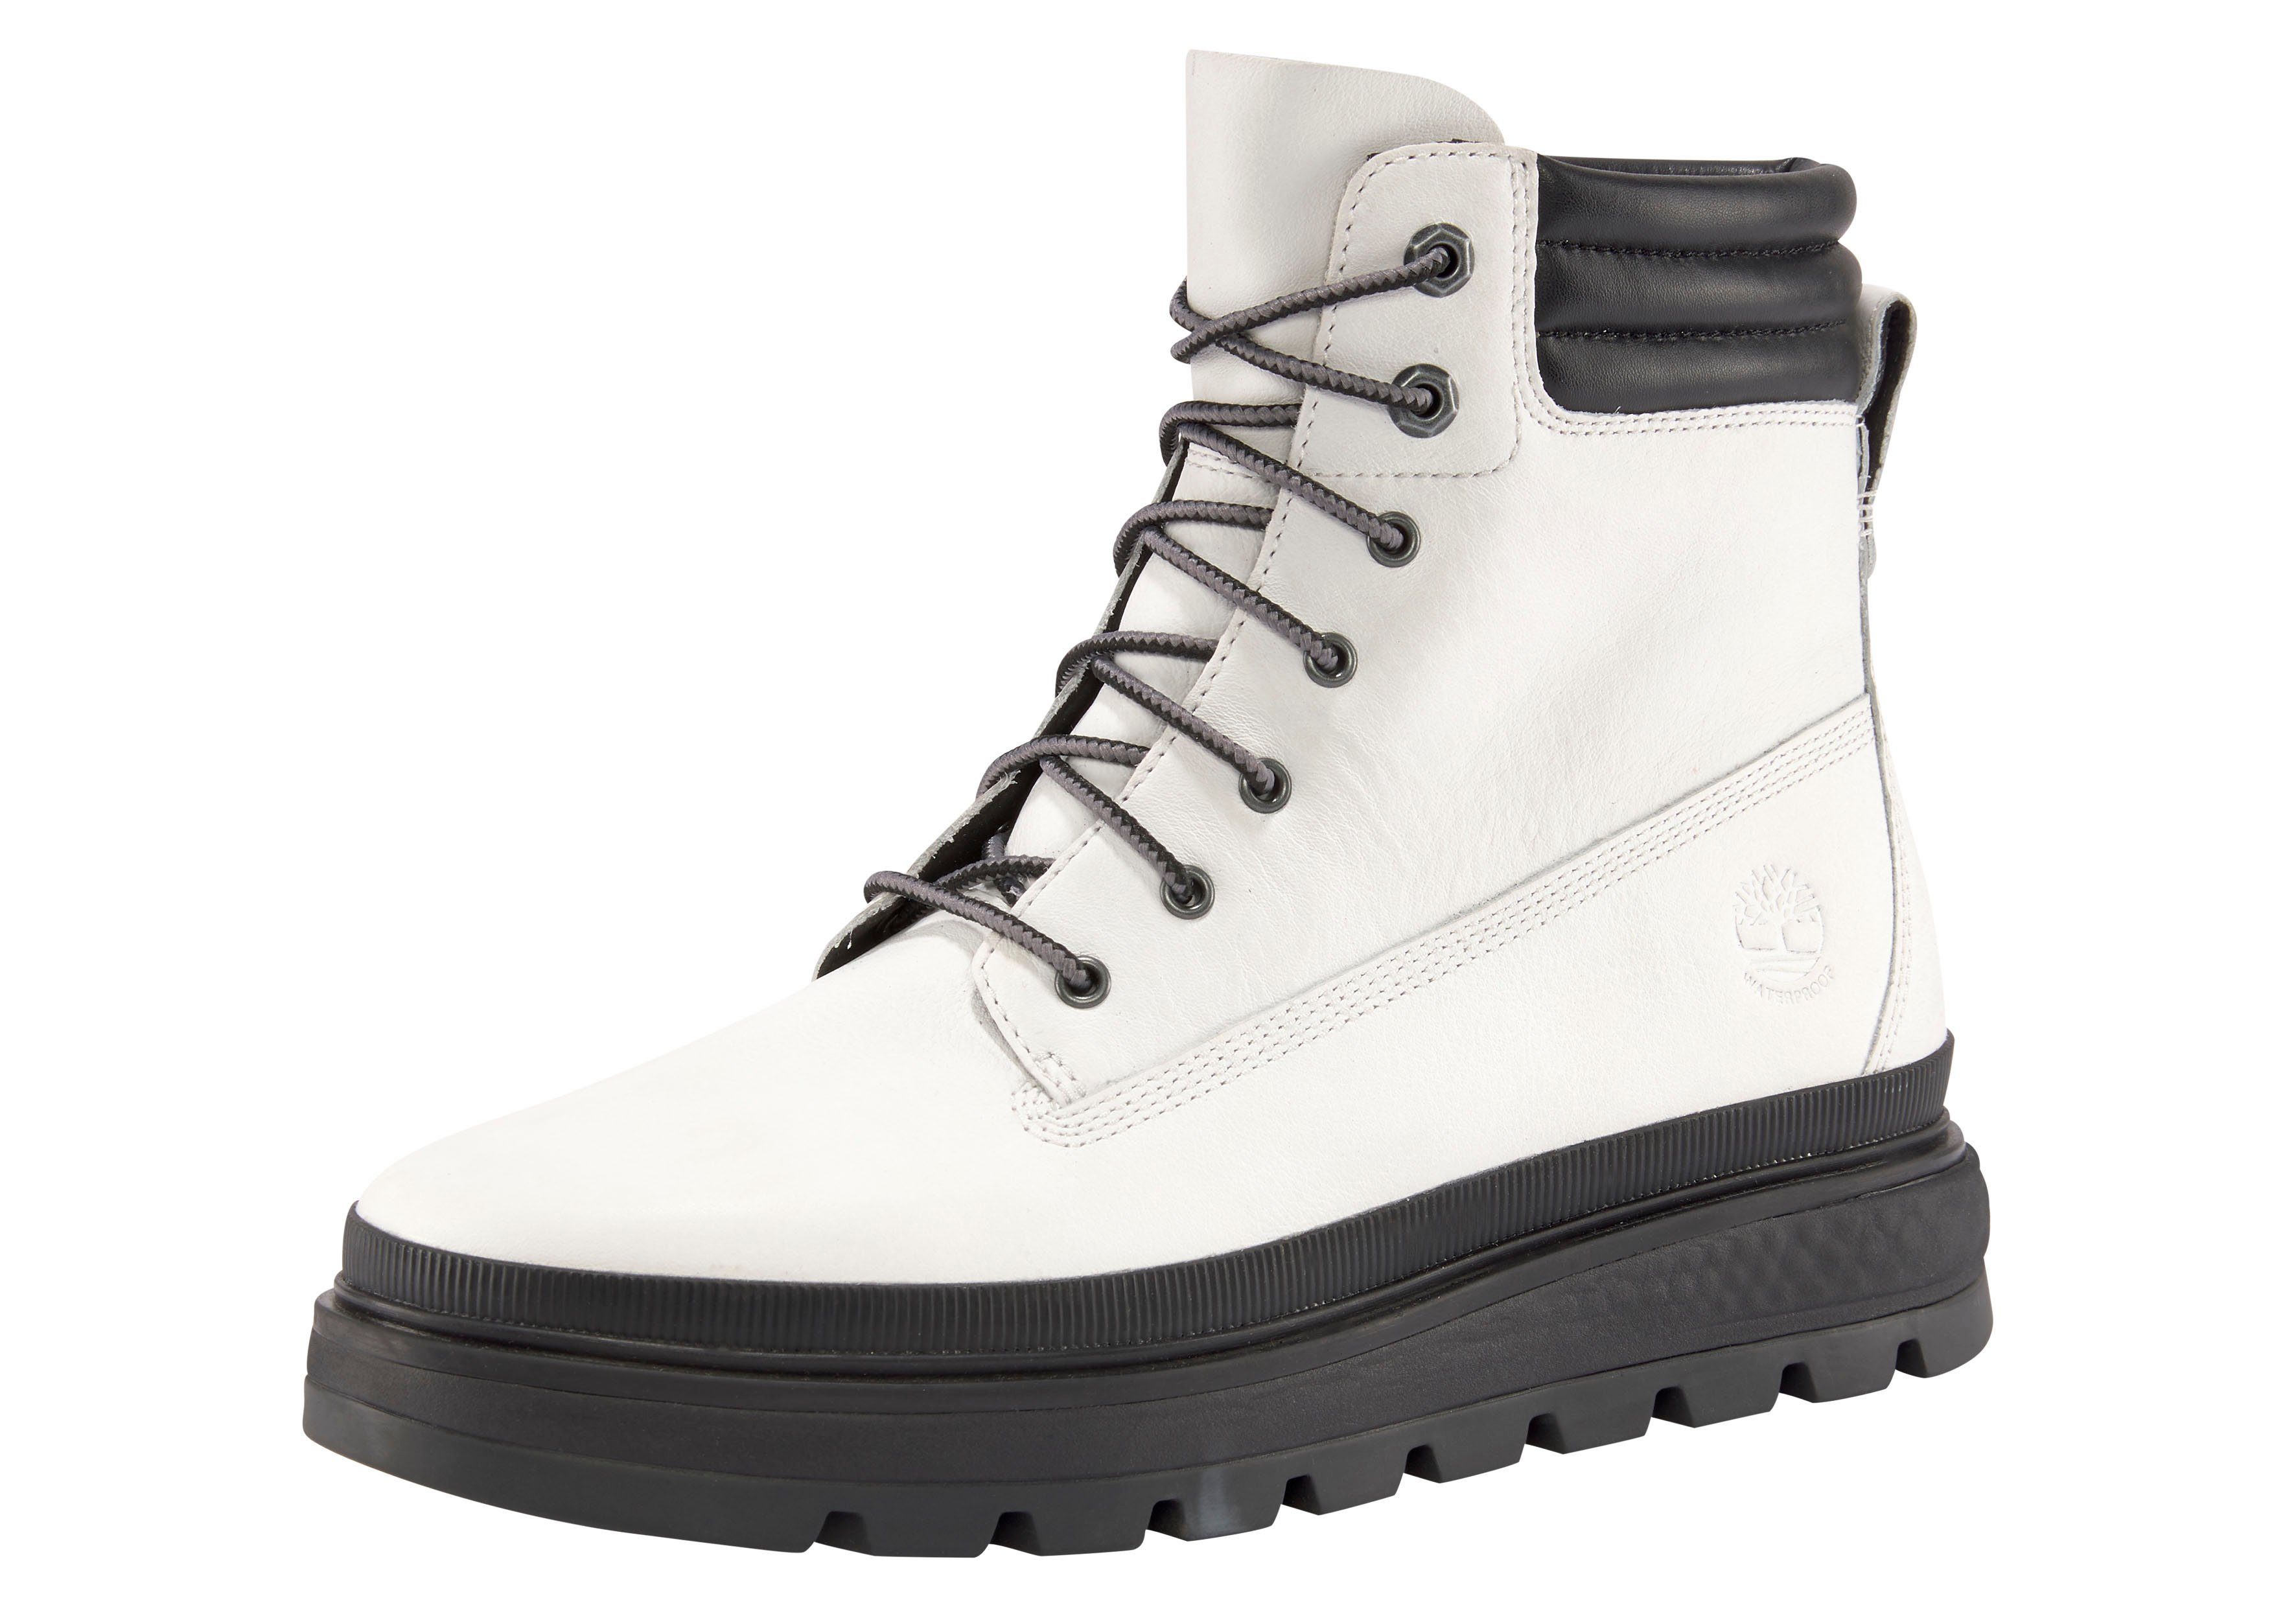 Timberland »Ray City 6 inch Boot WP« Schnürboots